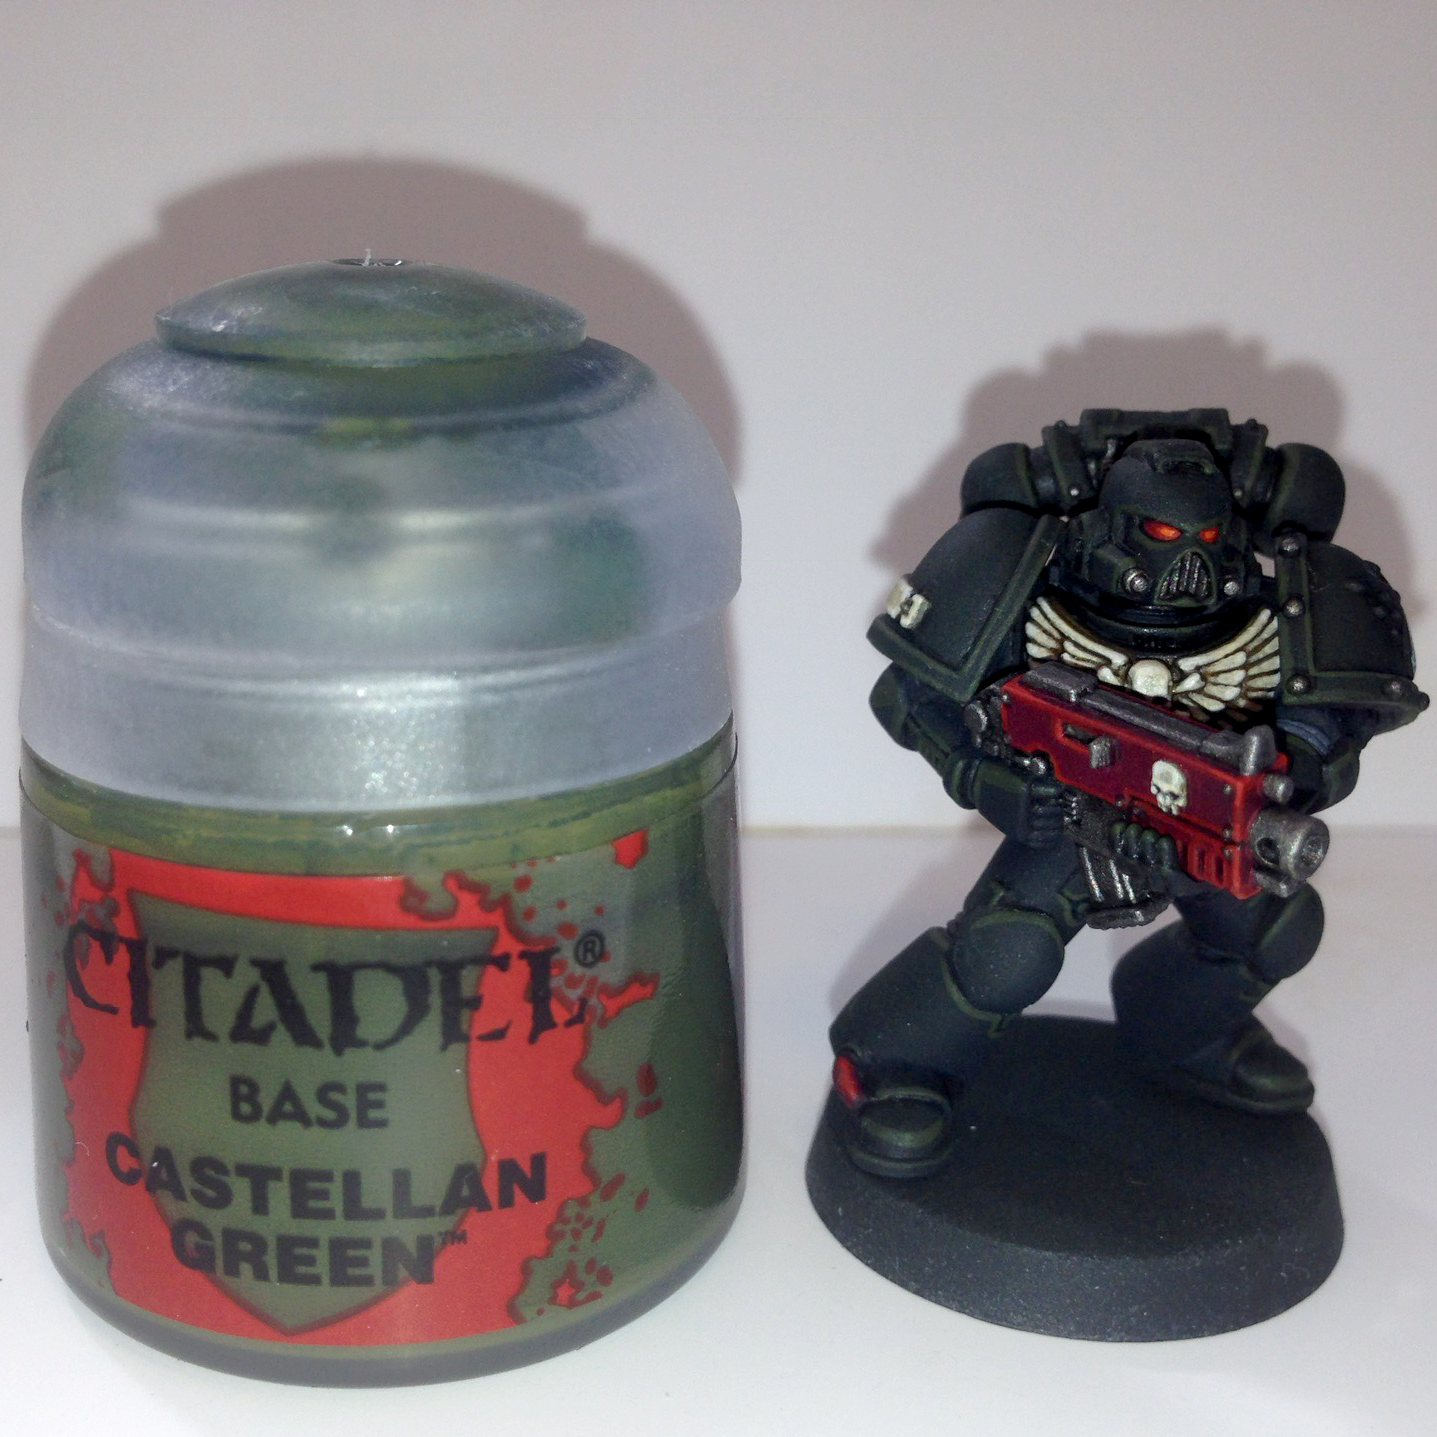 Painting Dark Angels - Step-by-Step - FauxHammer